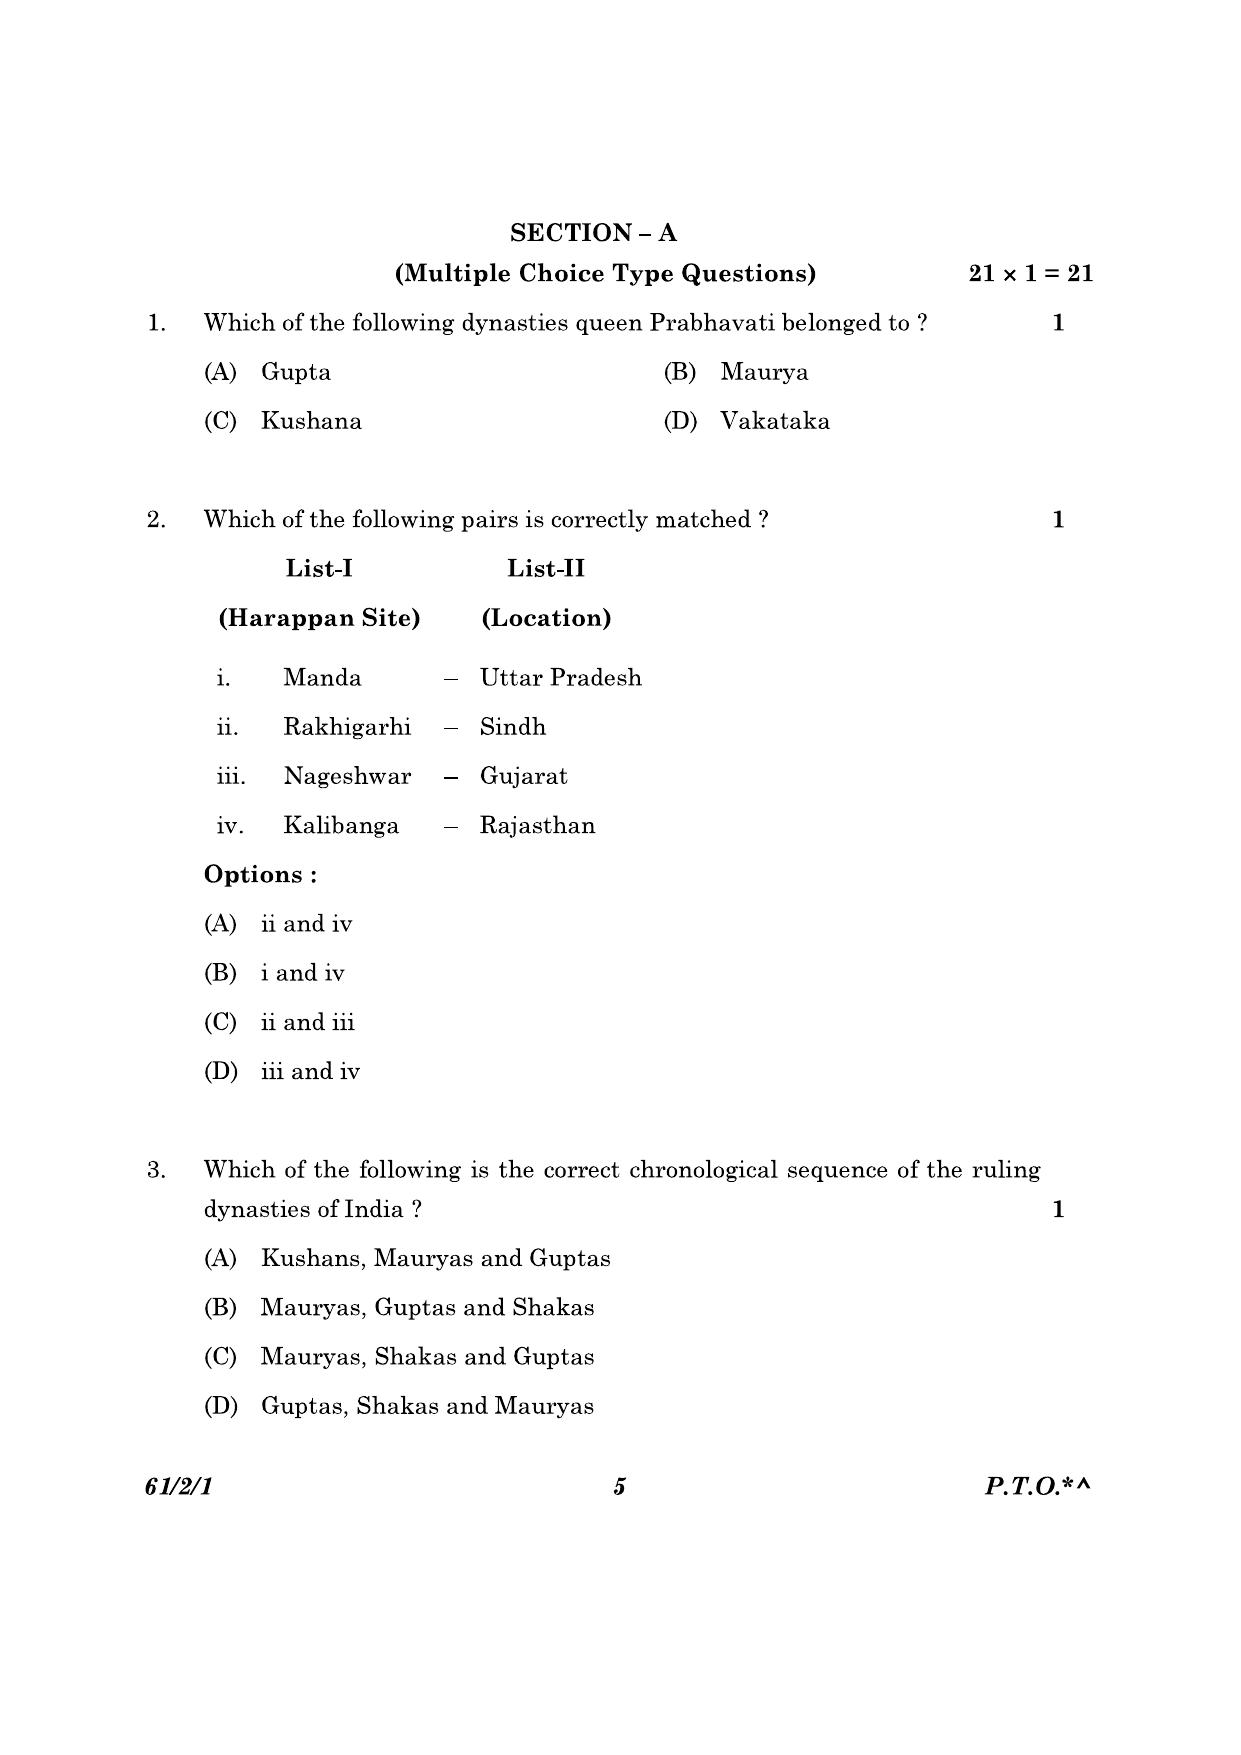 CBSE Class 12 61-2-1 History 2023 Question Paper - Page 5